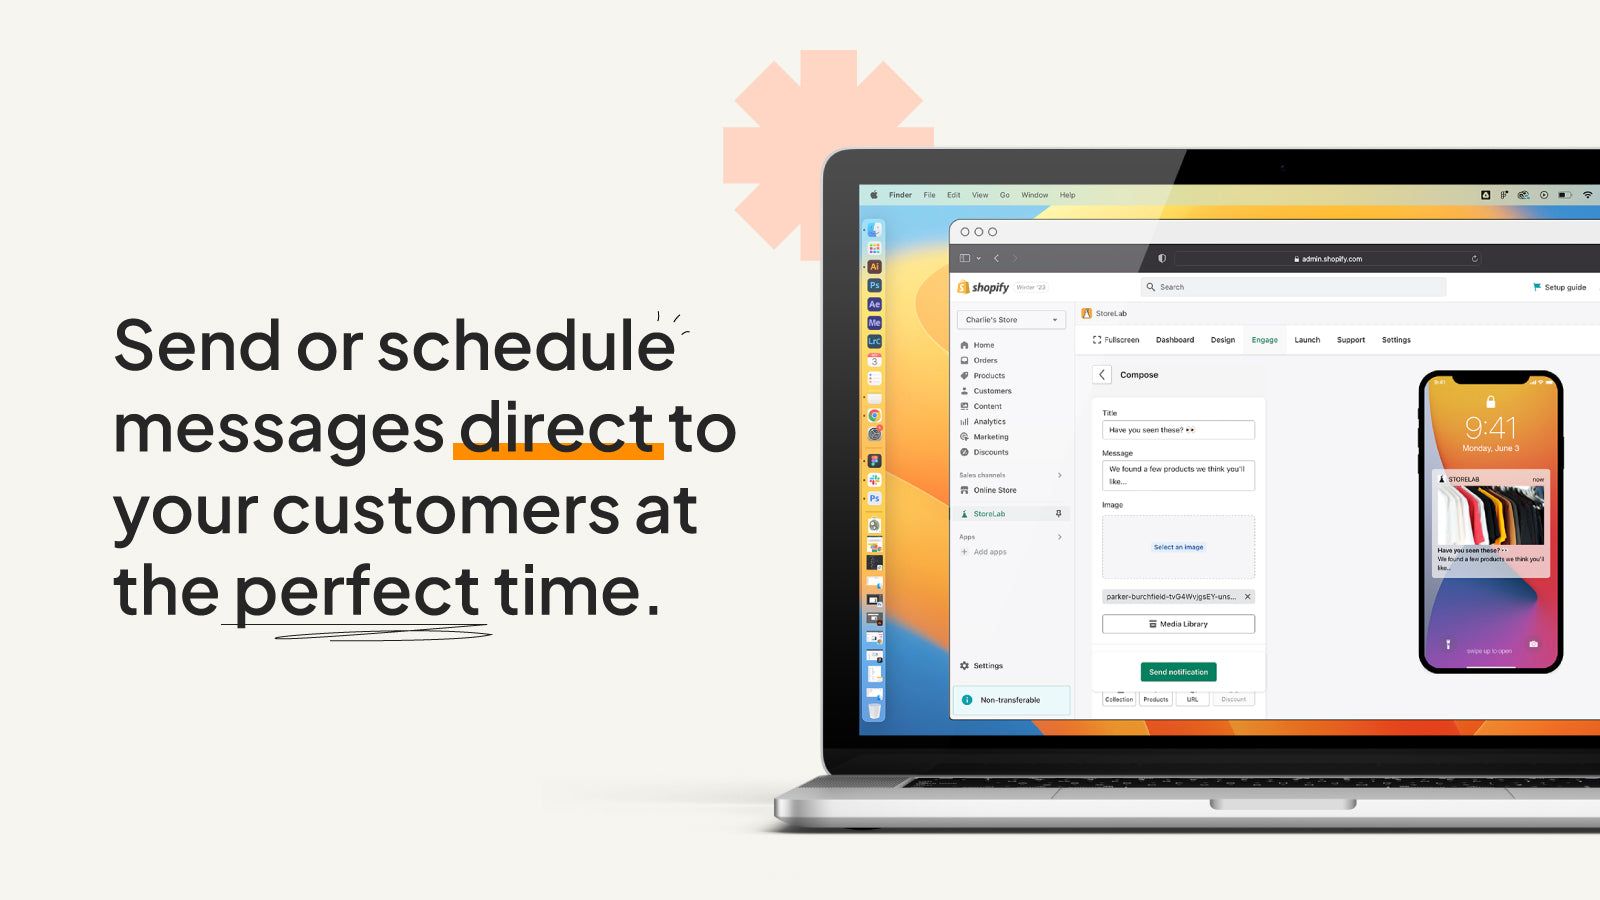 Send or schedule push notifications direct to your customers